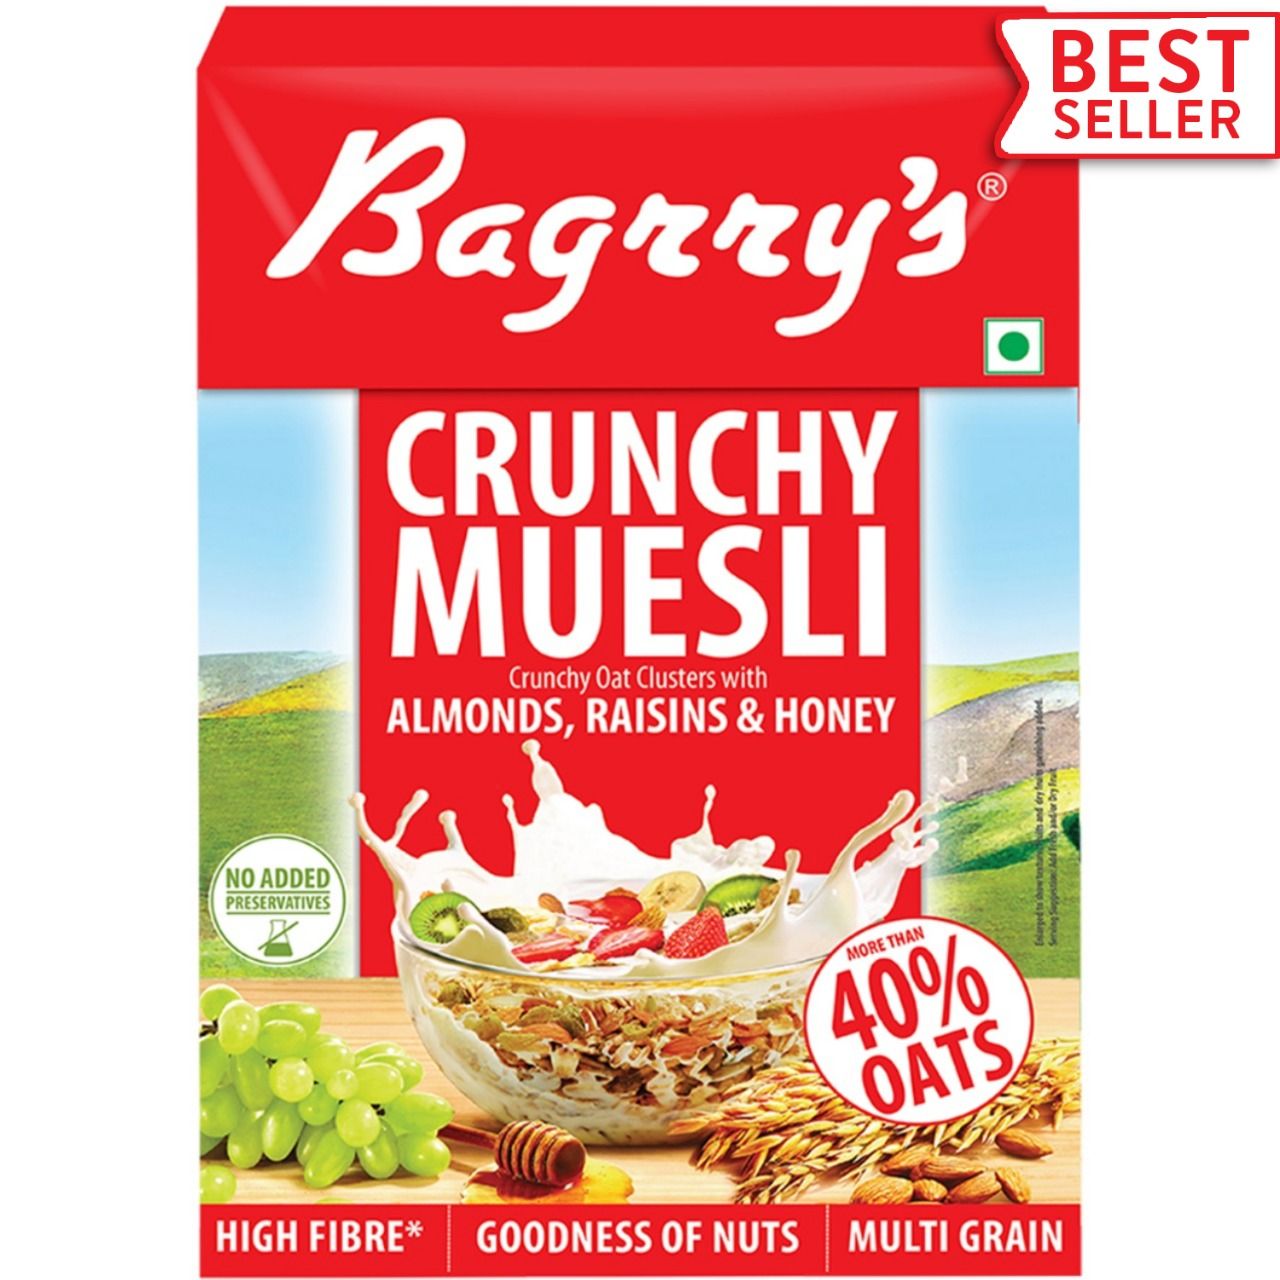 Bagrry's Crunchy Muesli With Almonds, Raisins And Honey Image